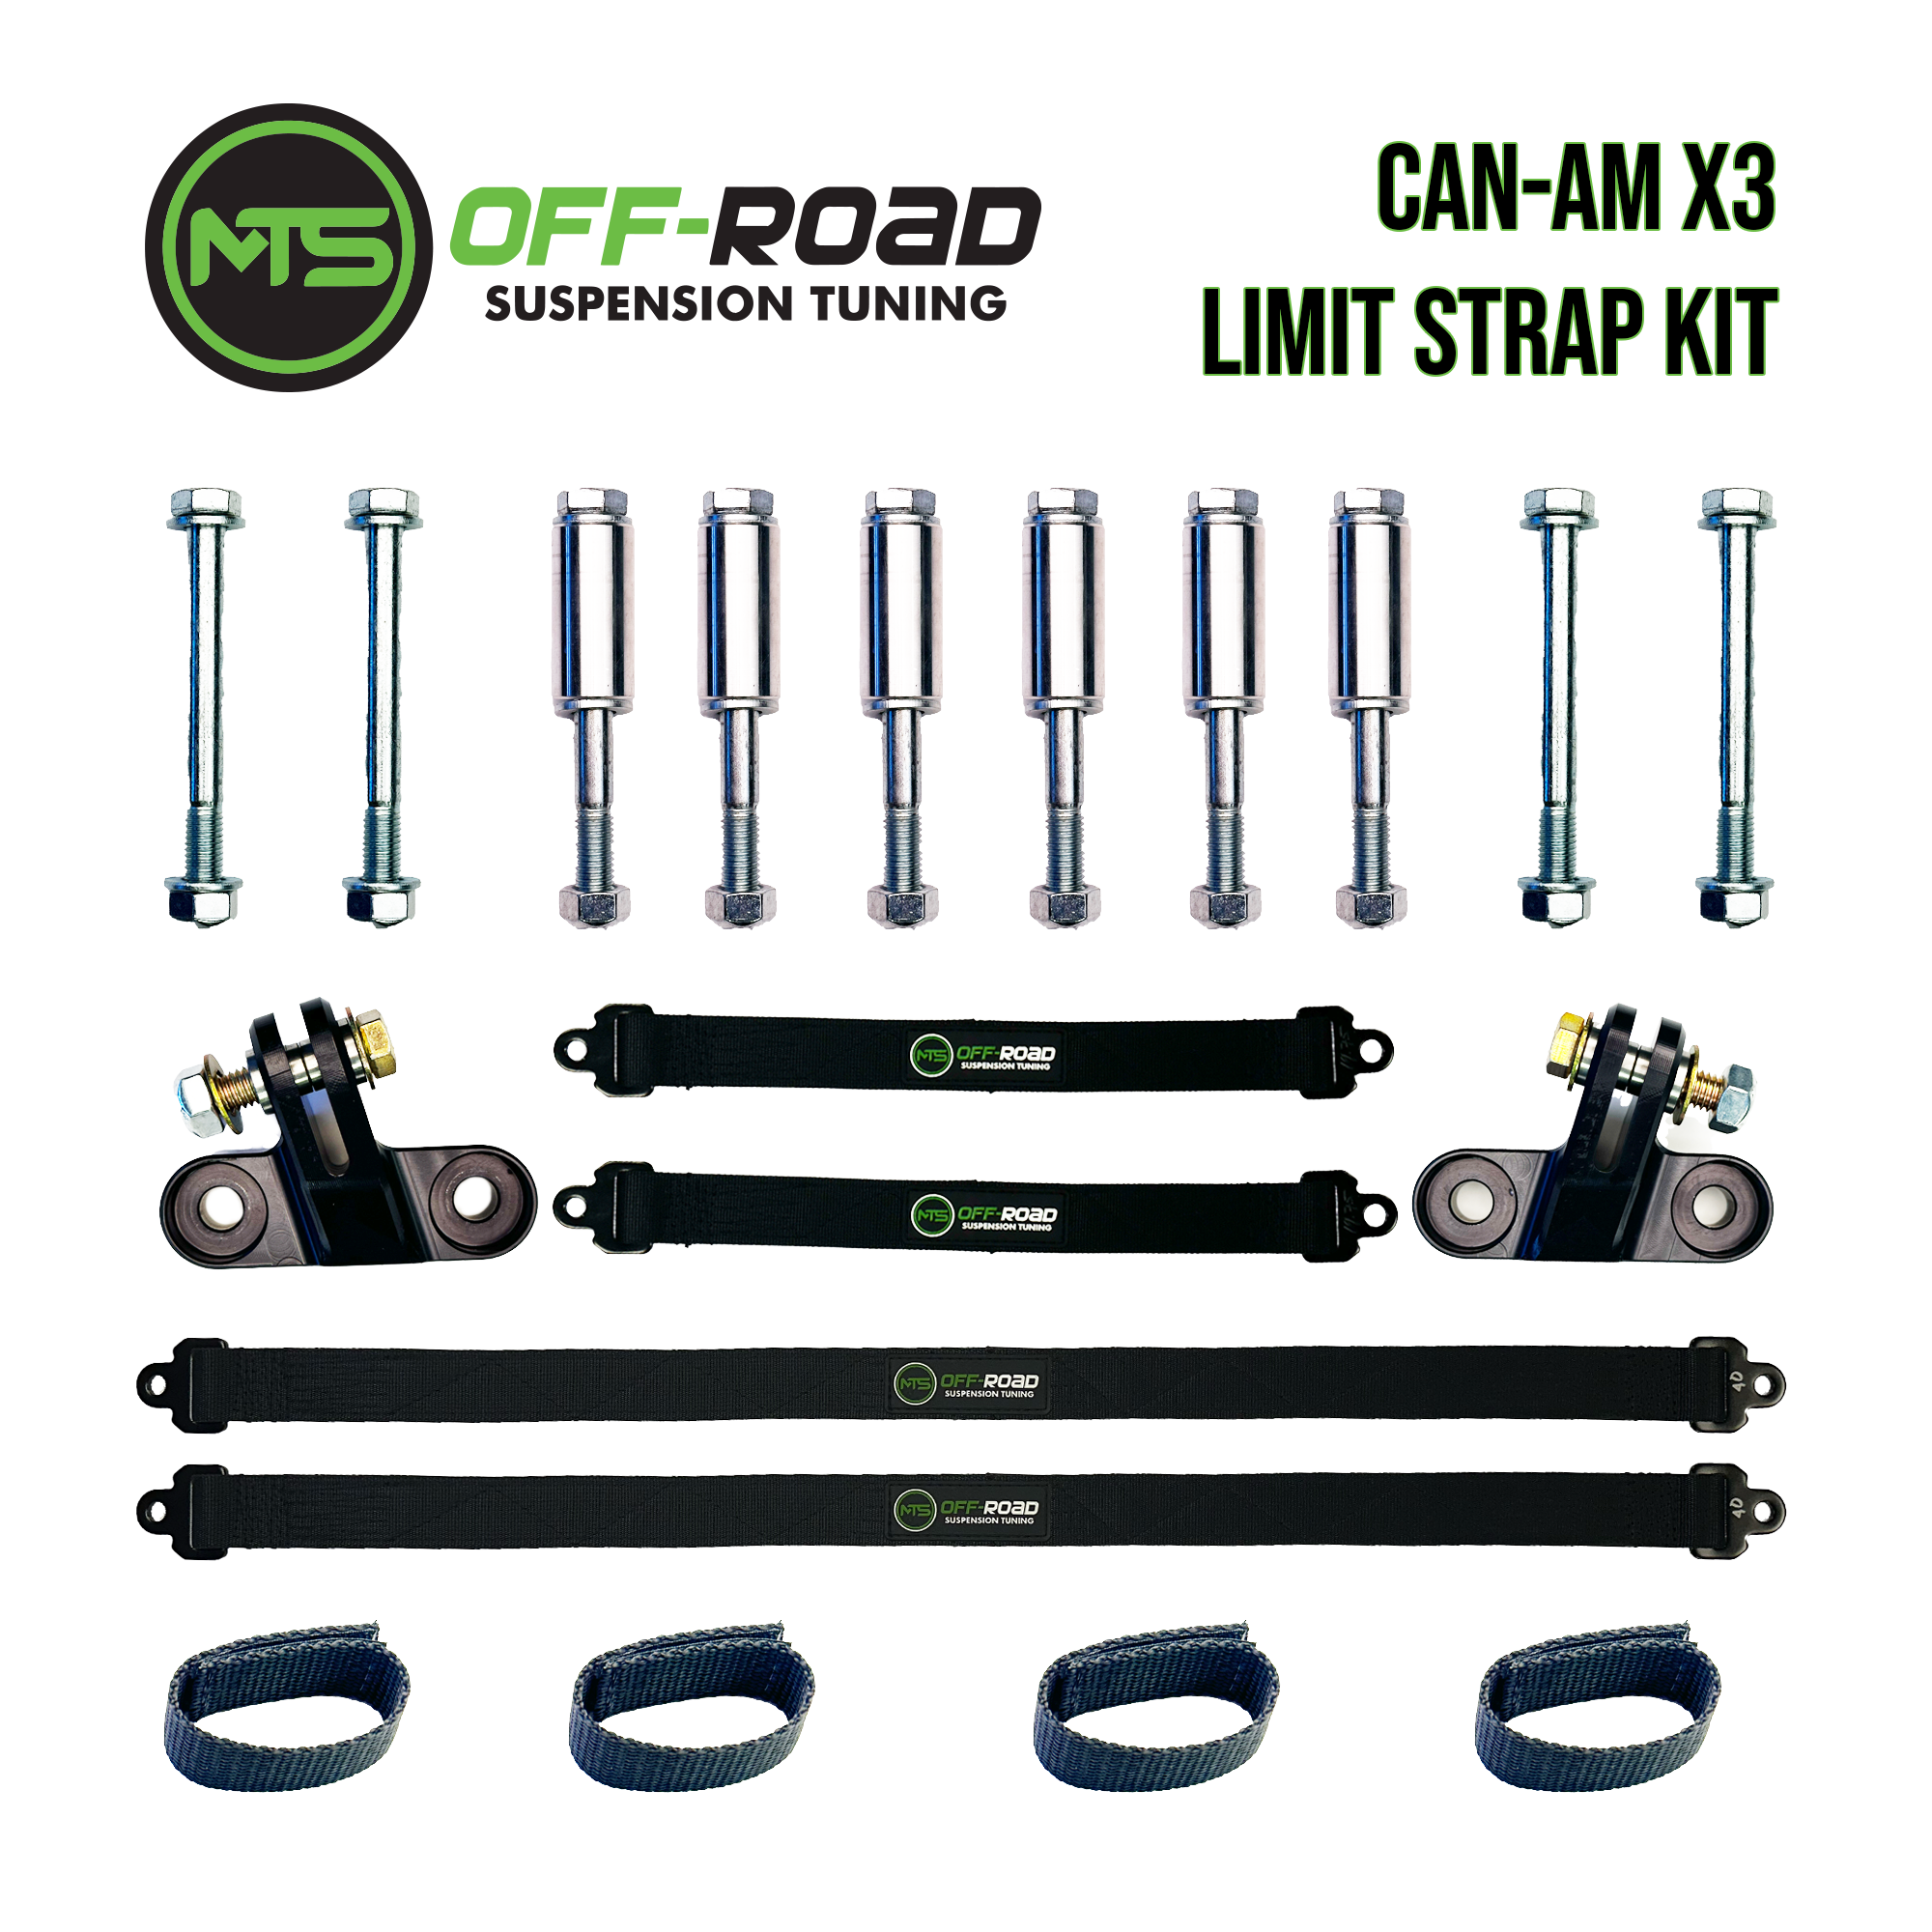 MTS Off-Road Can-Am X3 Limit Strap Kit